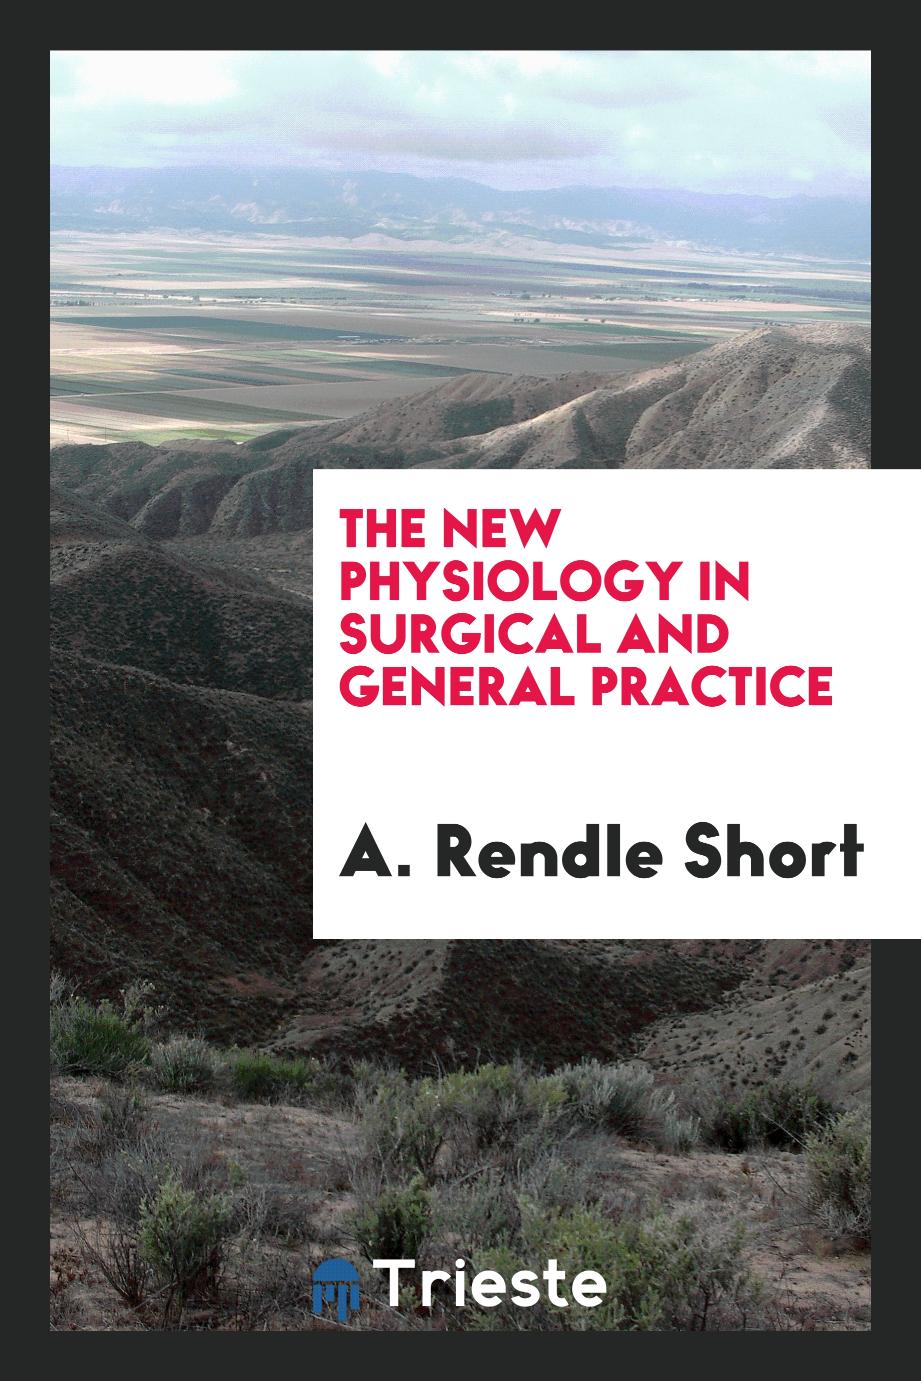 The new physiology in surgical and general practice